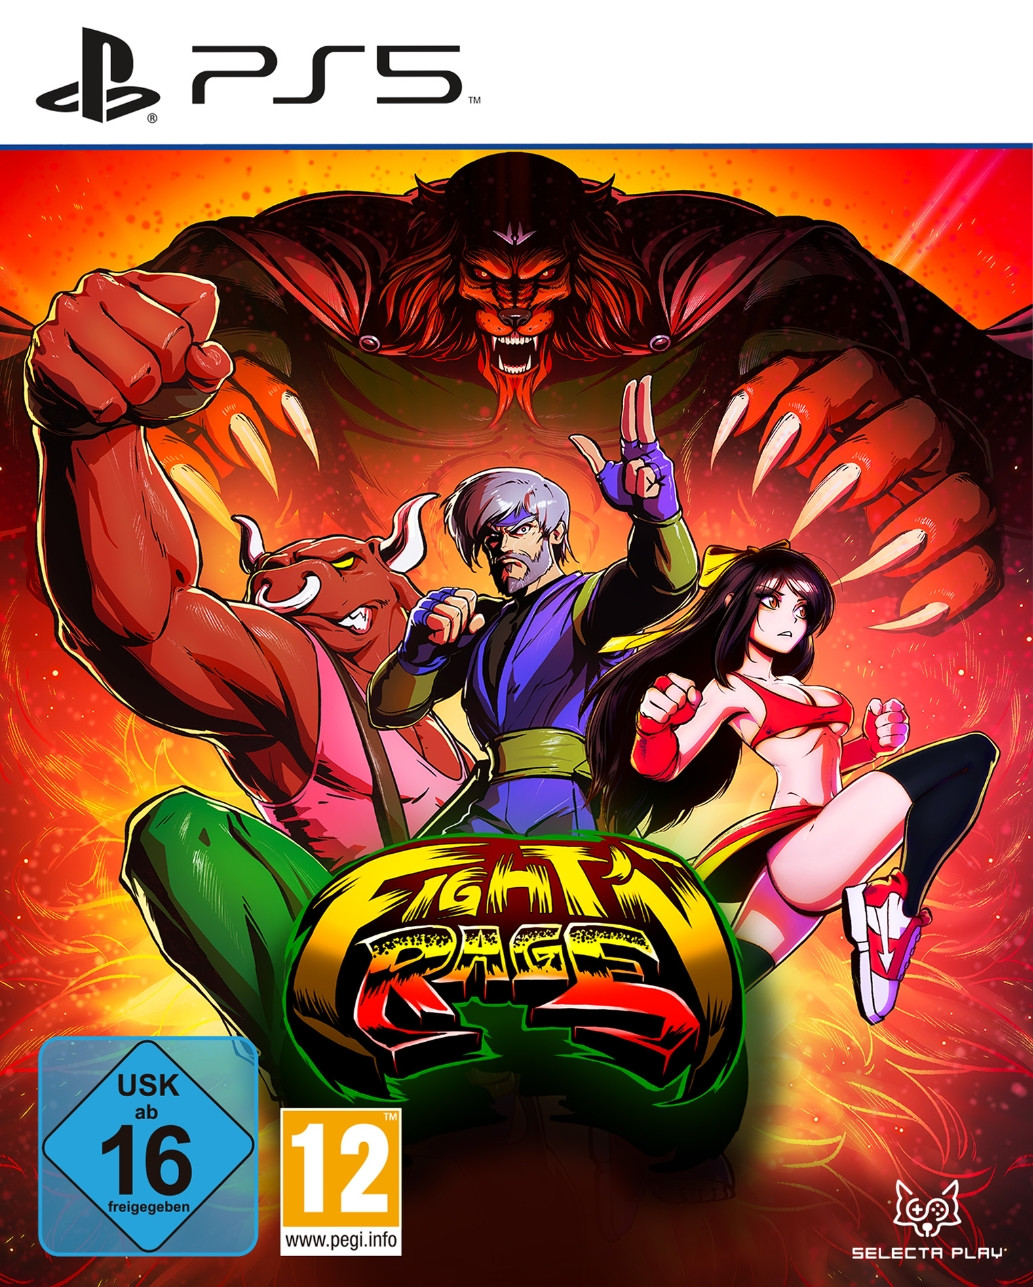 Fight'n Rage: 5th Anniversary - Limited Edition (PS5), Selecta Play